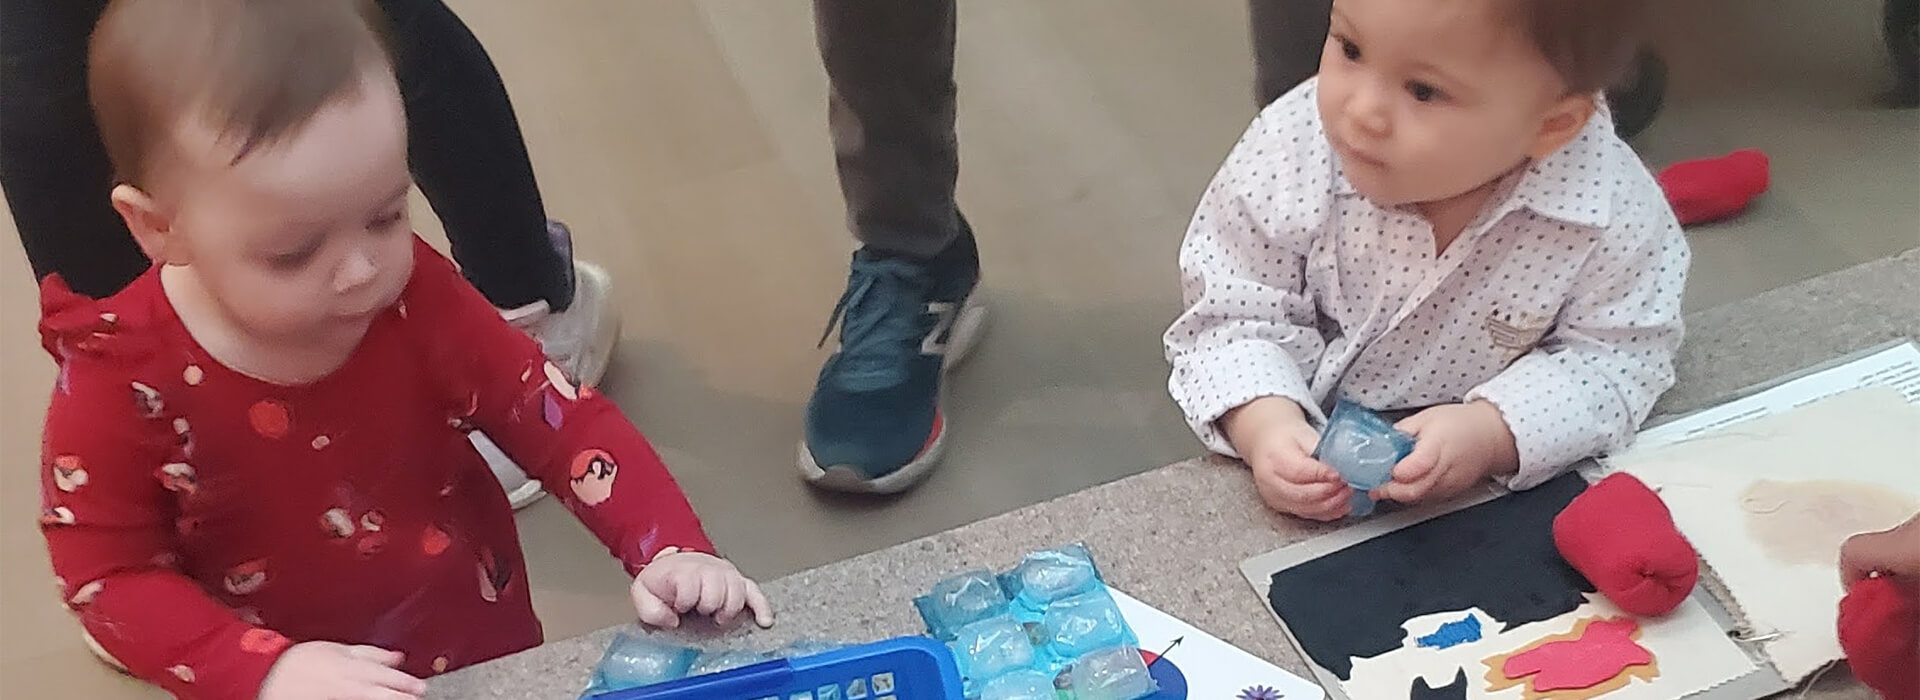 Two babies play with ice cubes and art